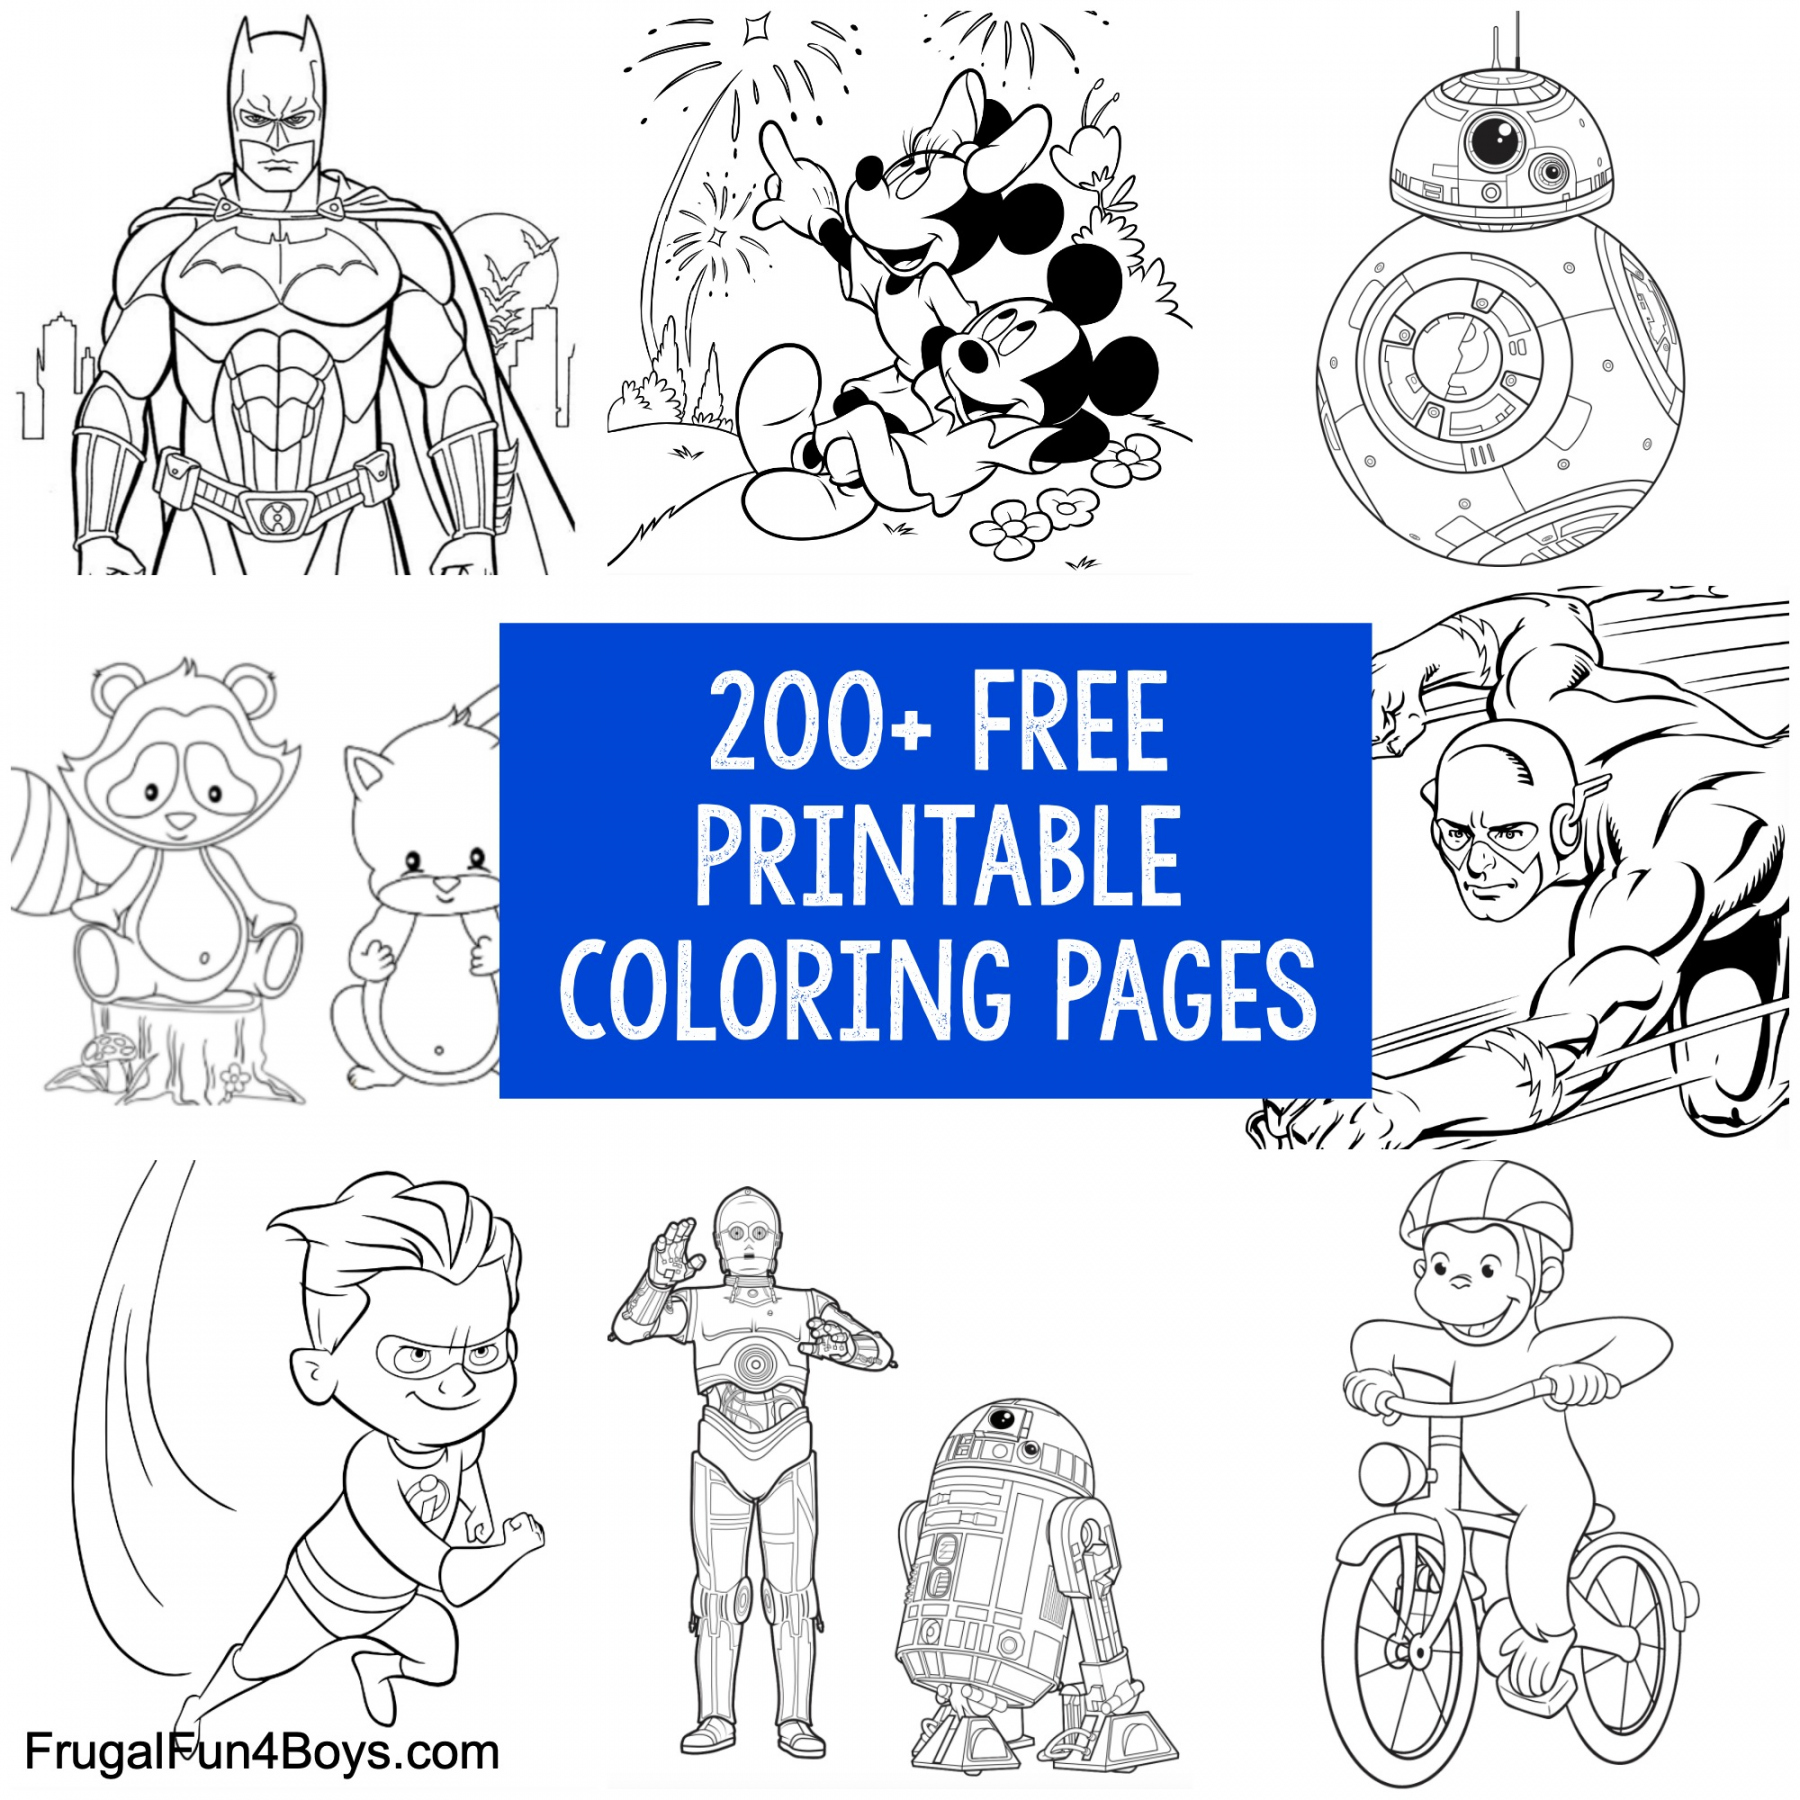 + Printable Coloring Pages for Kids - Frugal Fun For Boys and Girls